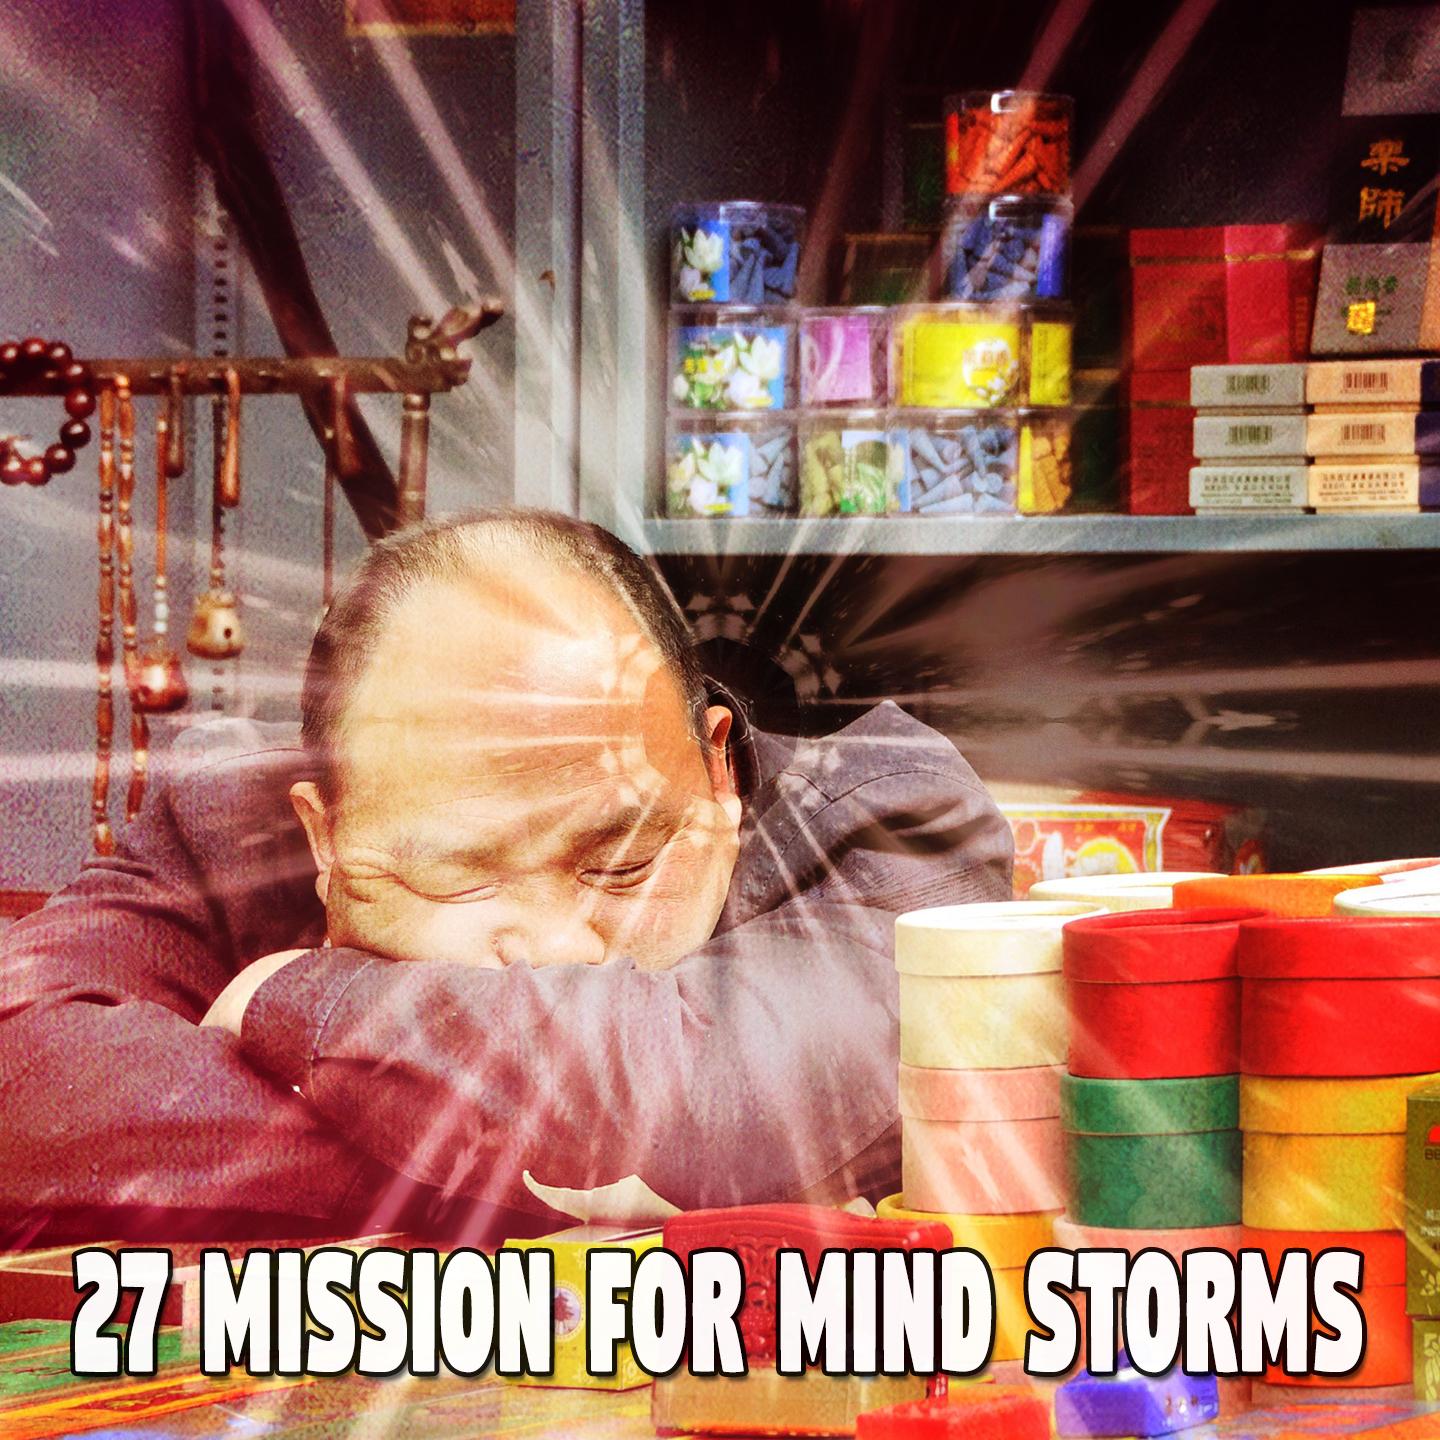 27 Mission for Mind Storms